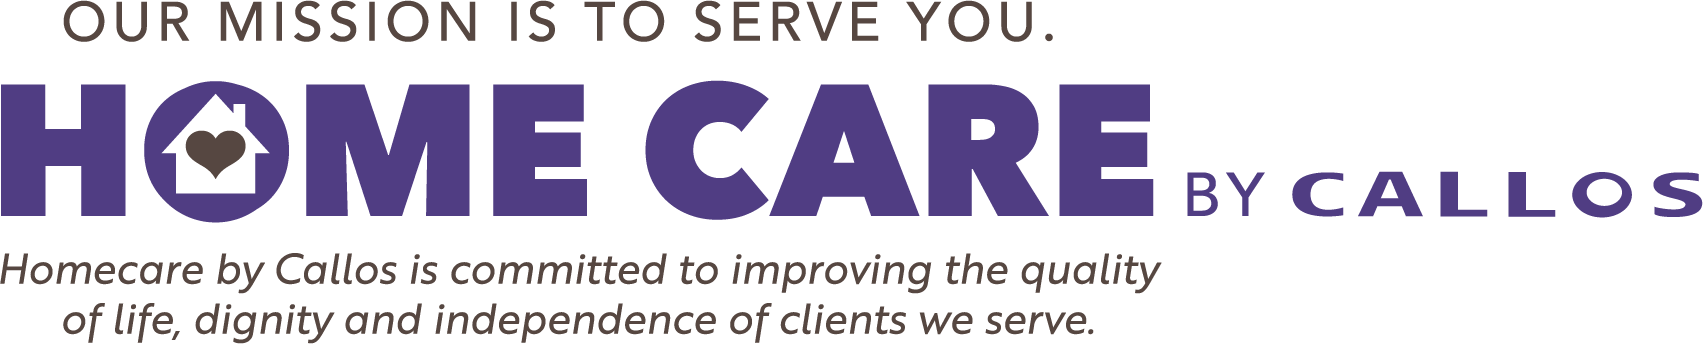 Home Care by Callos of Cleveland, OH at Independence, OH